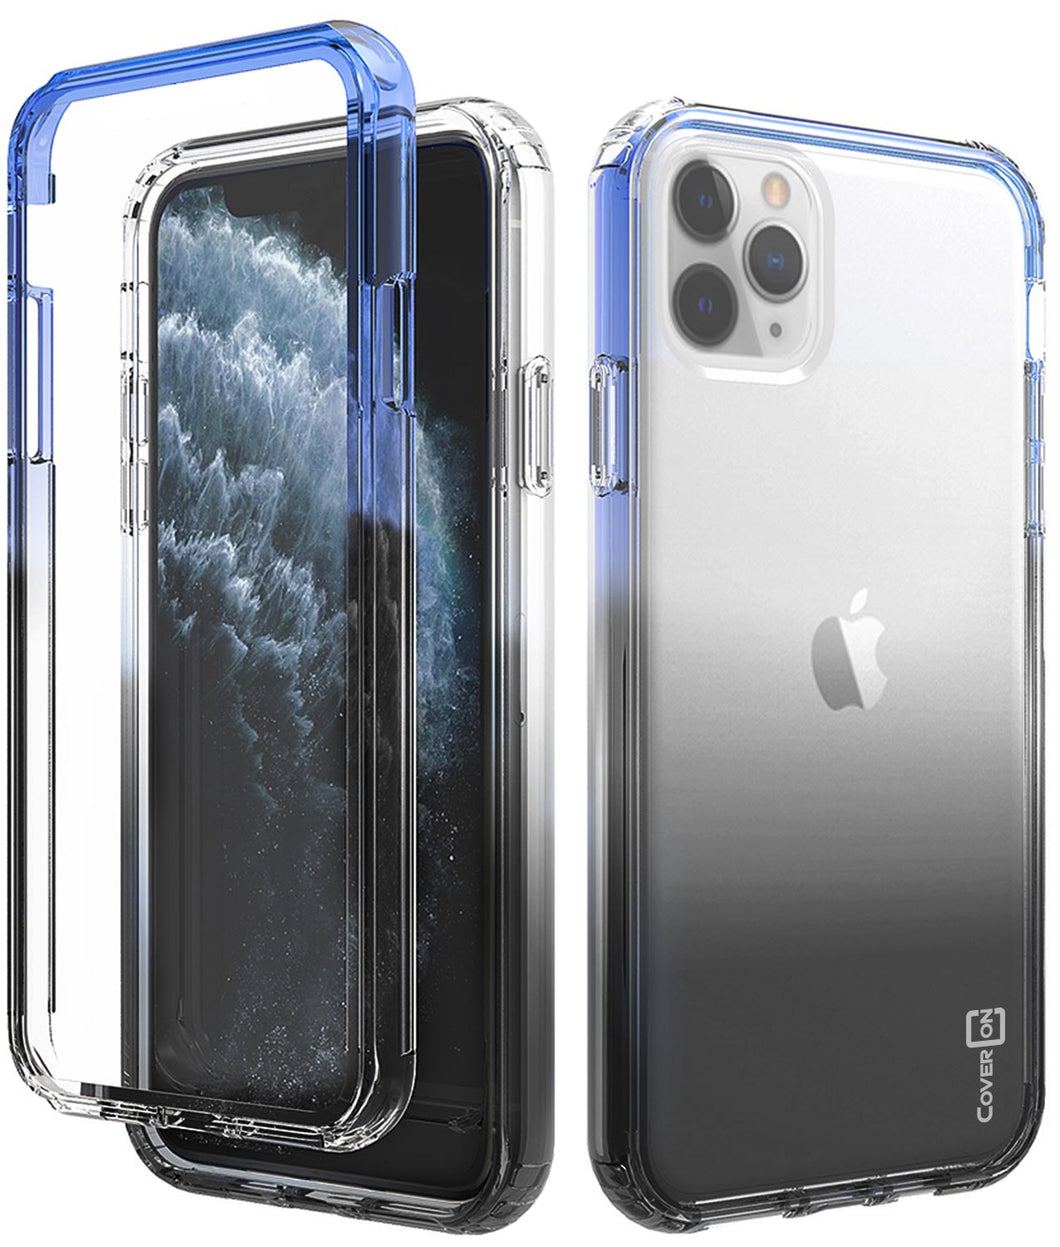 iPhone 11 Pro Max Clear Case - Full Body Colorful Phone Cover - Gradient Series